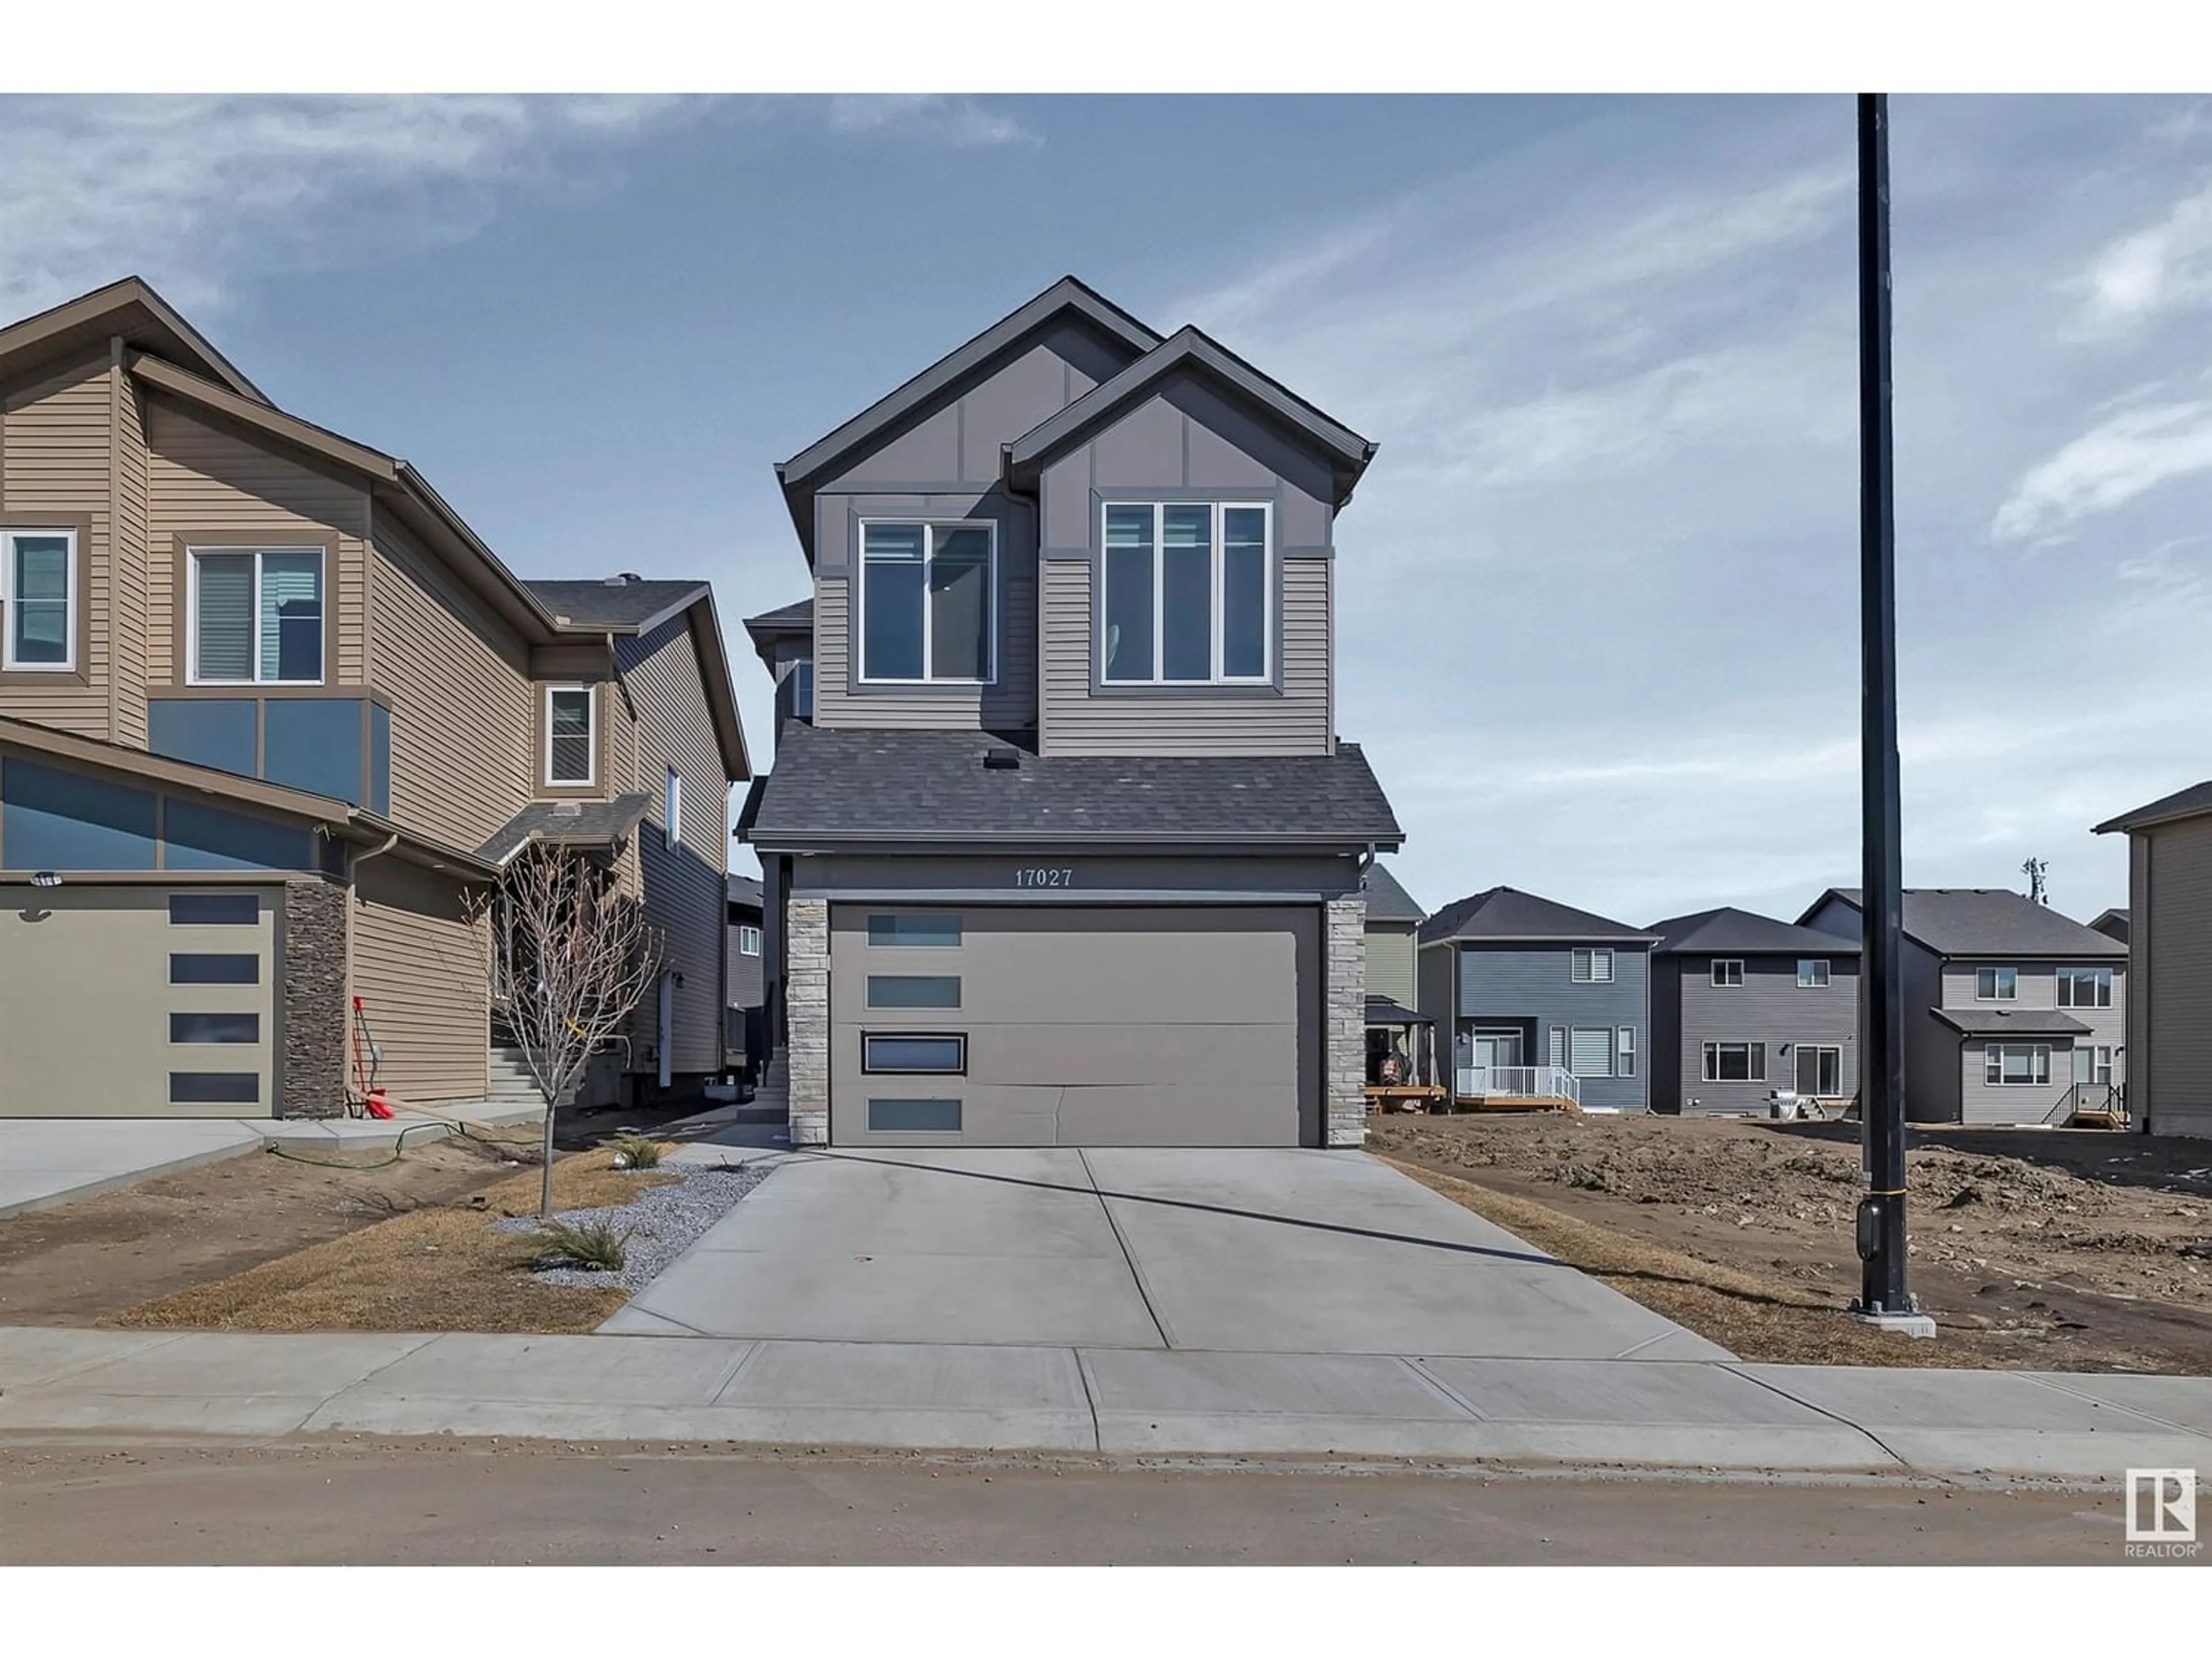 Frontside or backside of a home for 17027 47 ST NW NW, Edmonton Alberta T5Y3A6